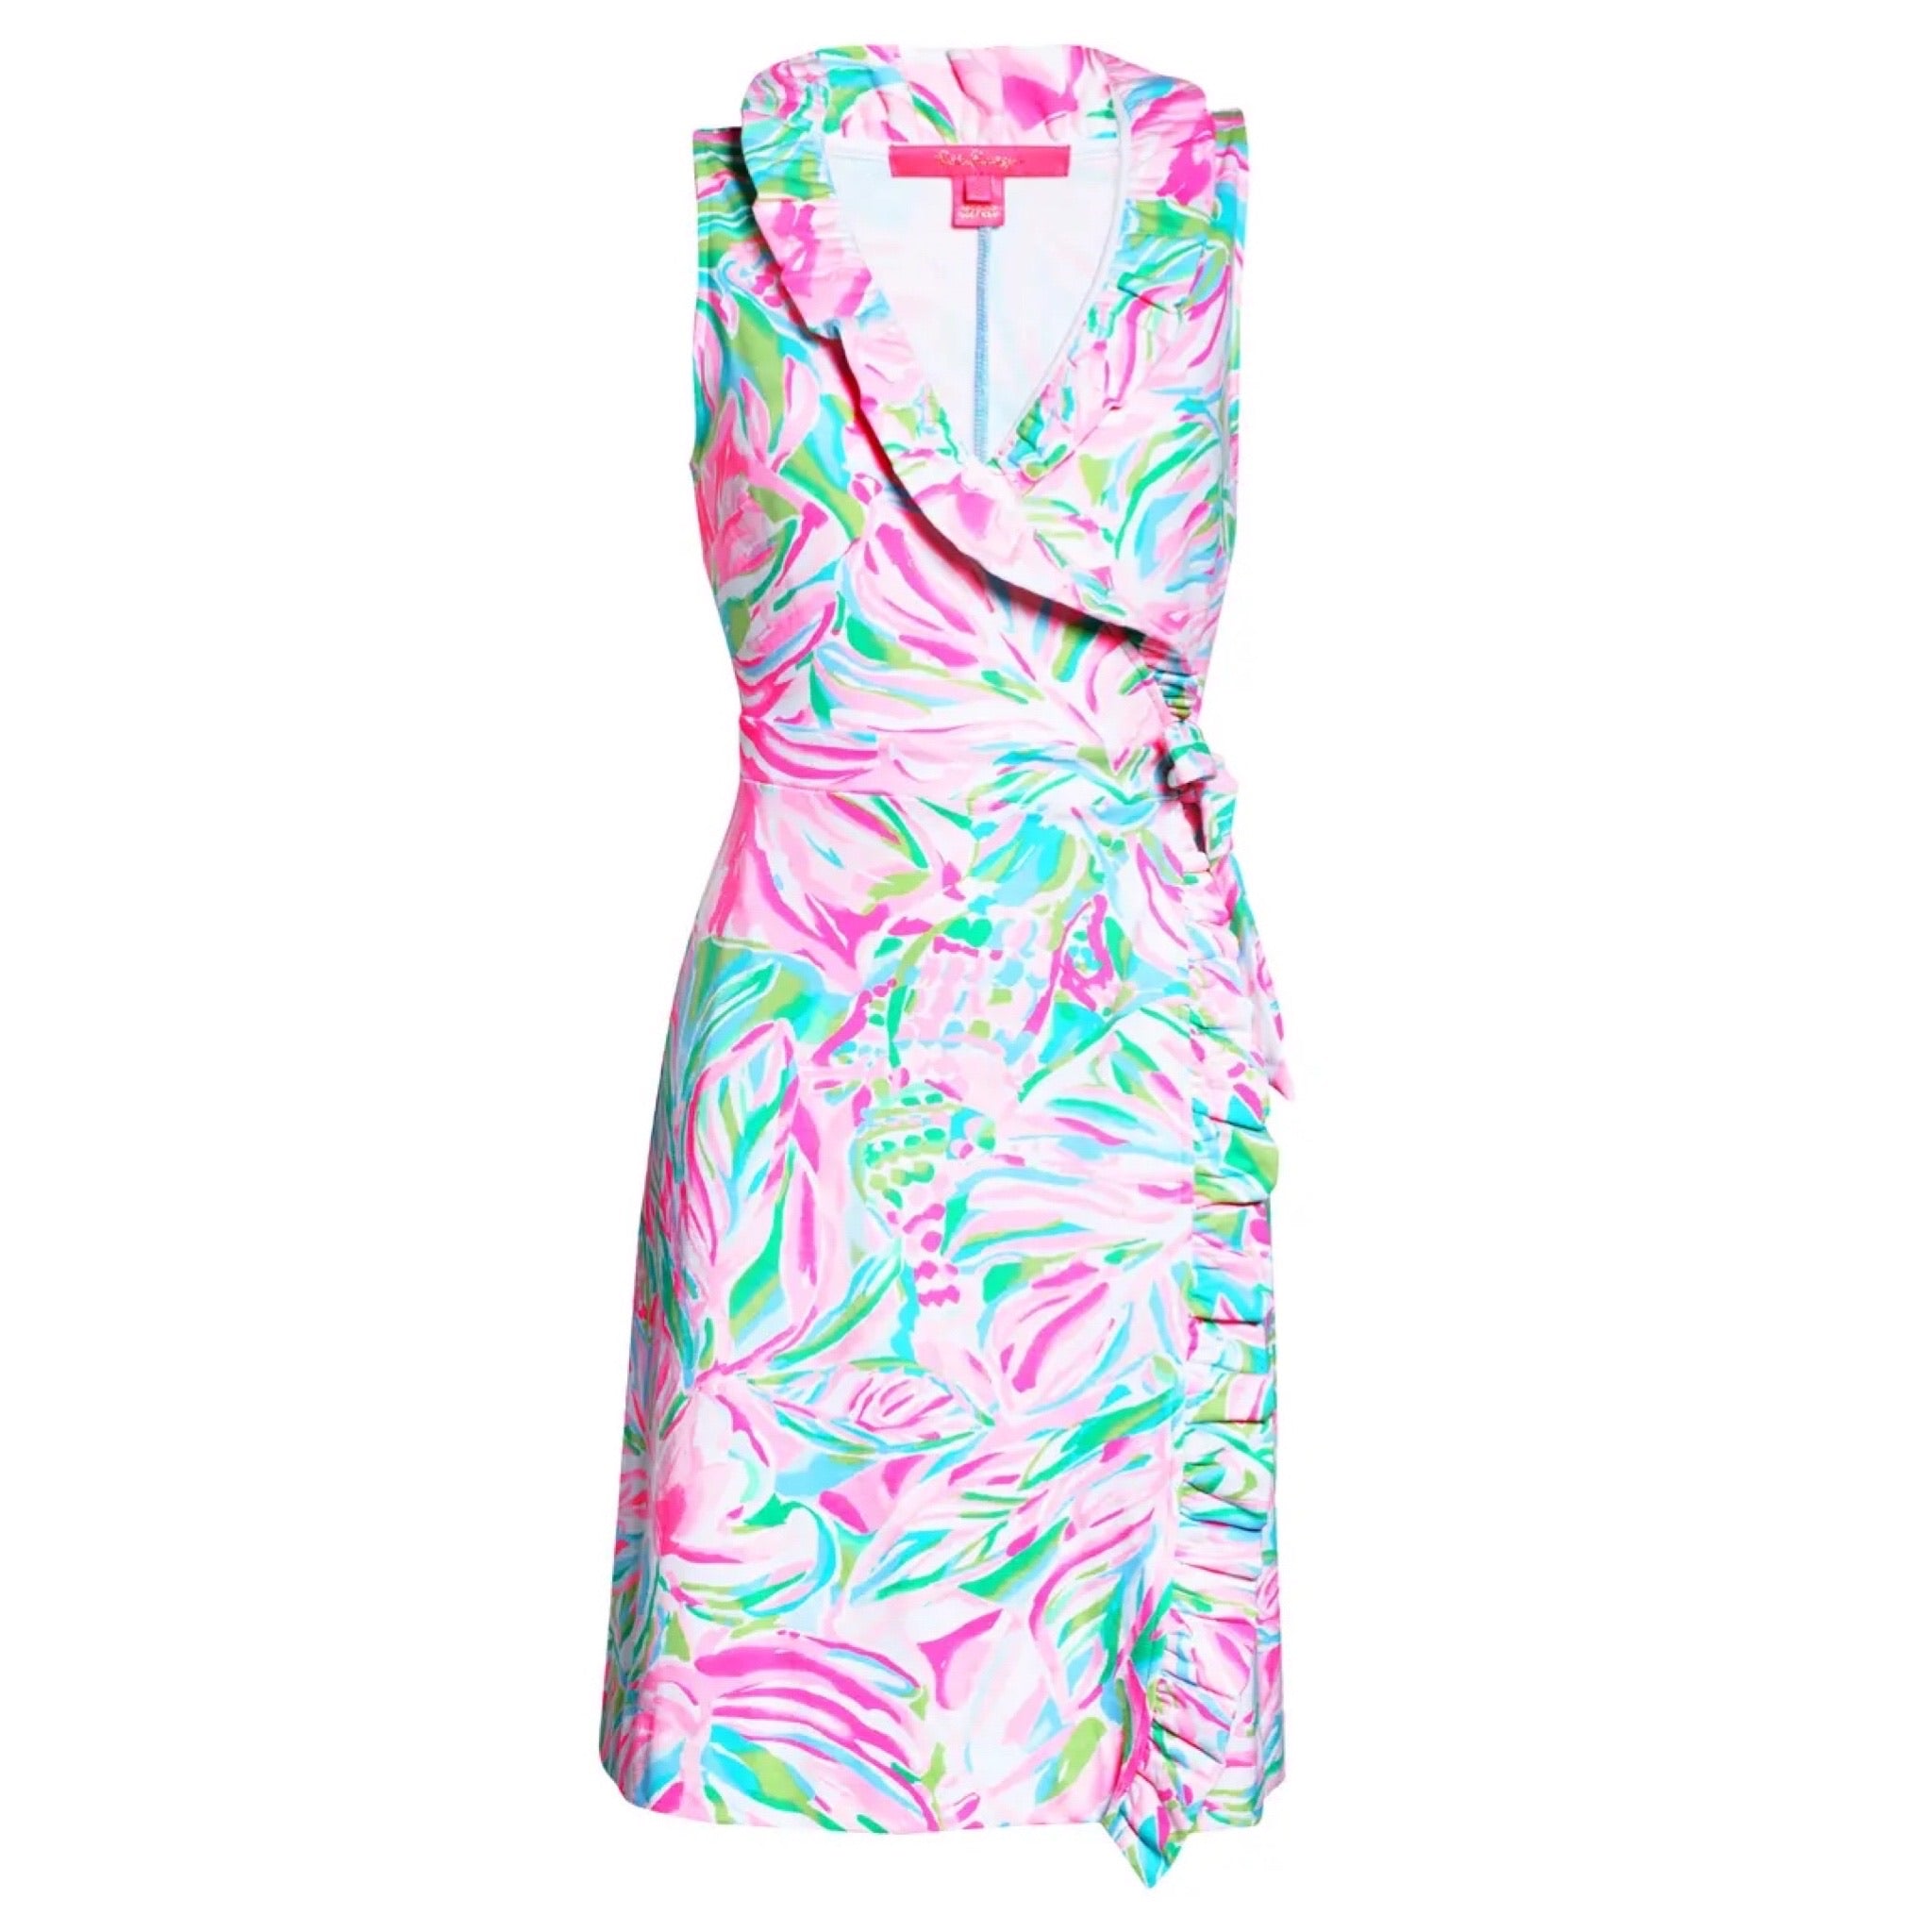 Lilly Pulitzer Romee Wrap Dress Size 6 ...